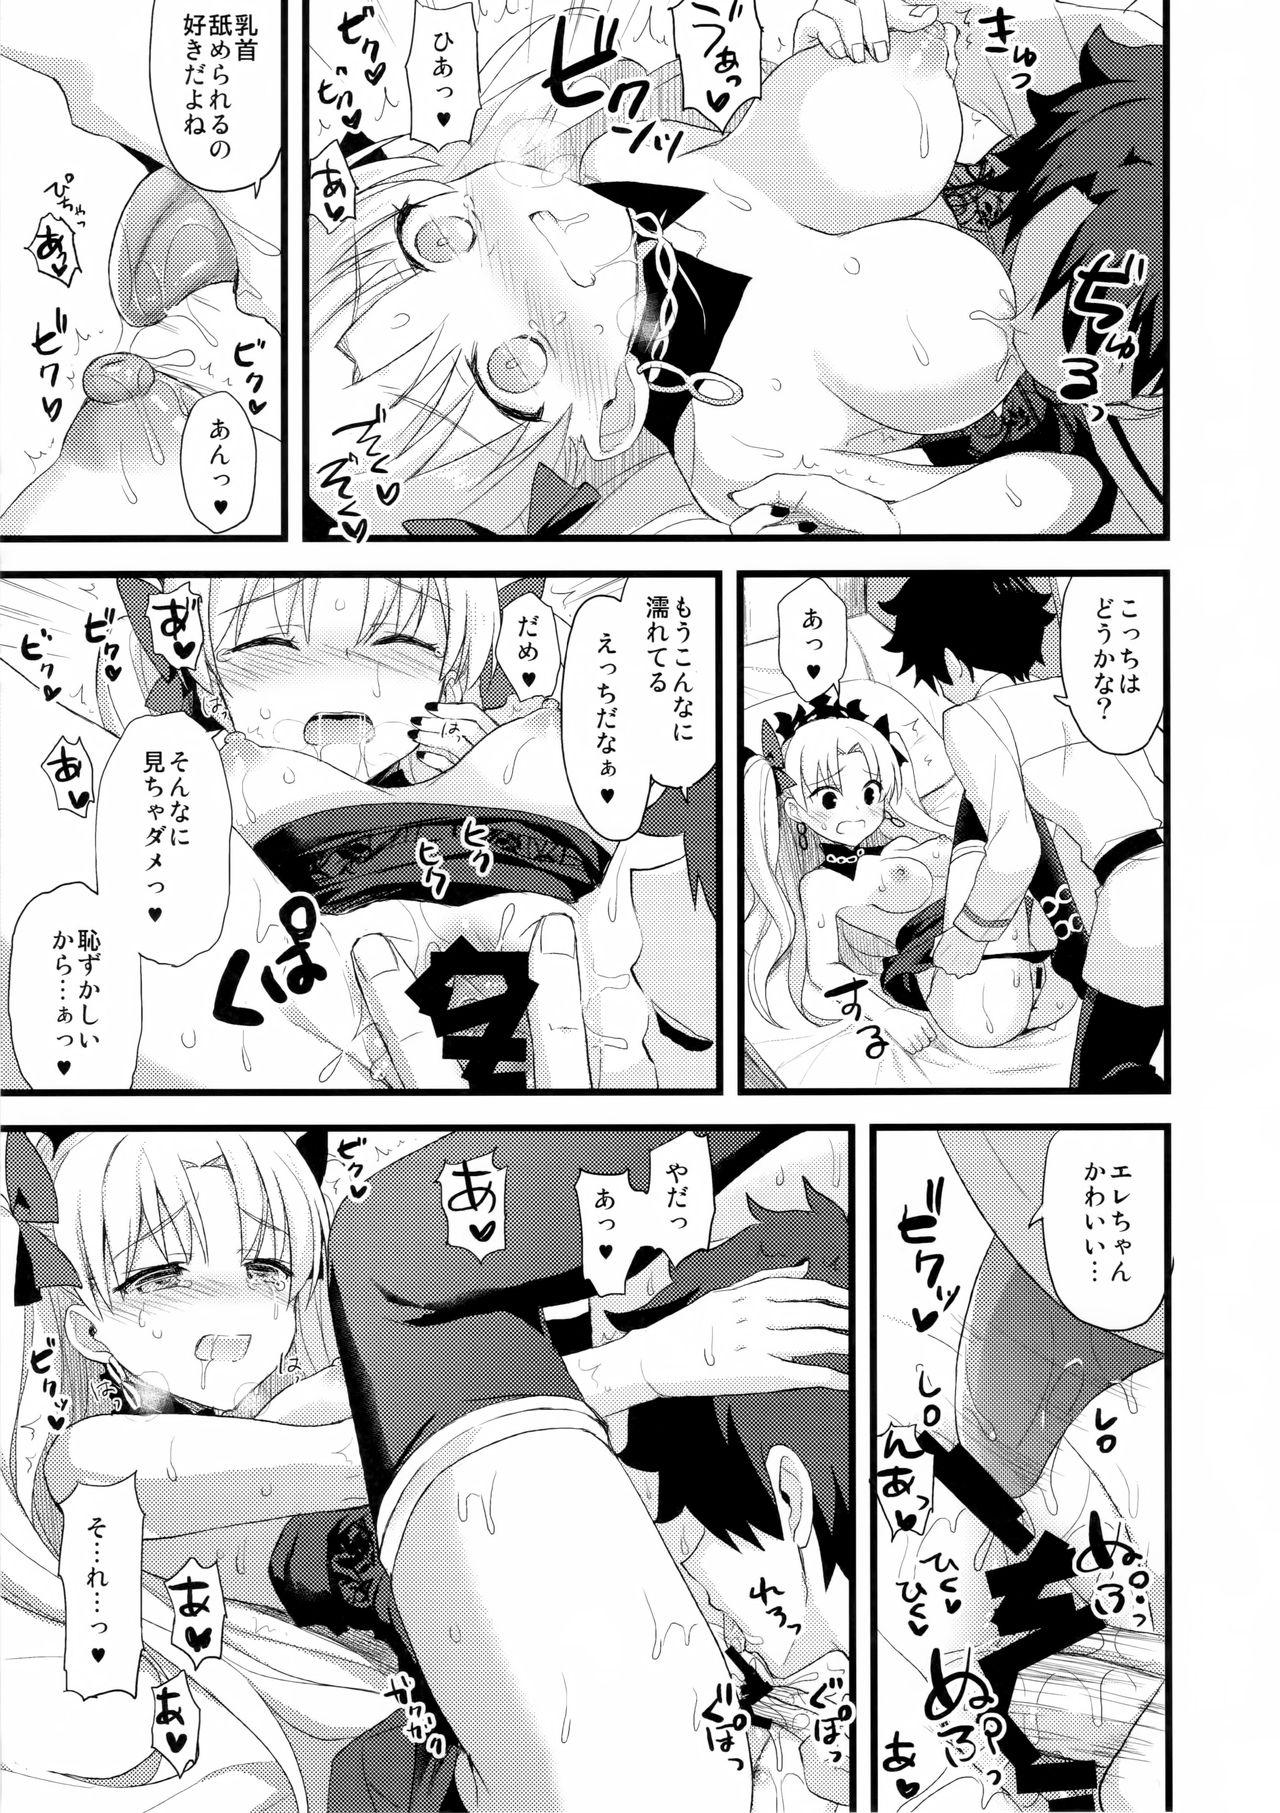 Camgirls My Room de Ere-chan to. - Fate grand order Camsex - Page 12